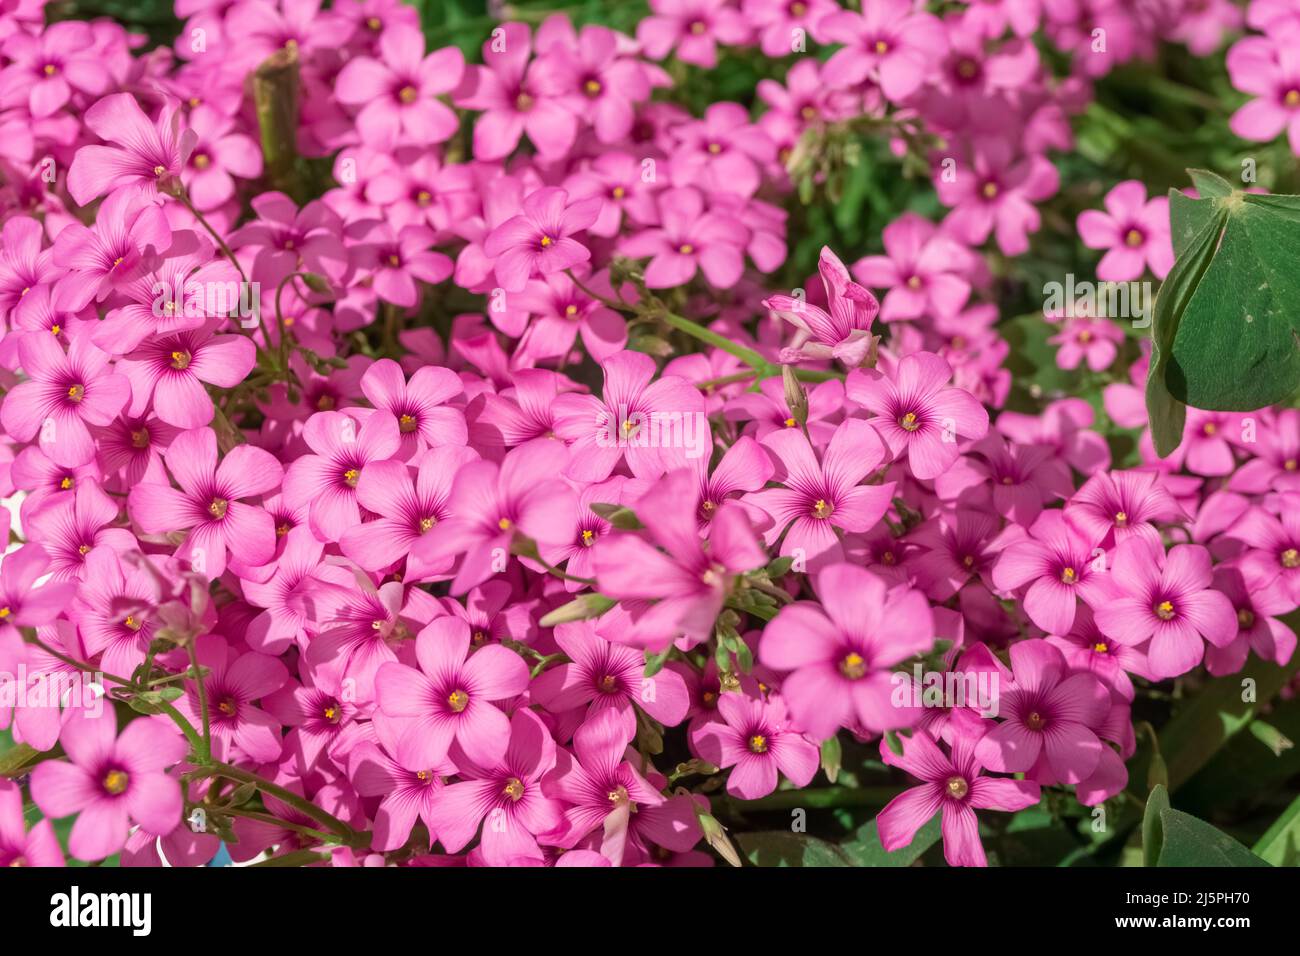 Oxalis articulata, known as pink-sorrel or pink wood sorrel. Close up view pink flowers. Spring and summer seasons. Stock Photo